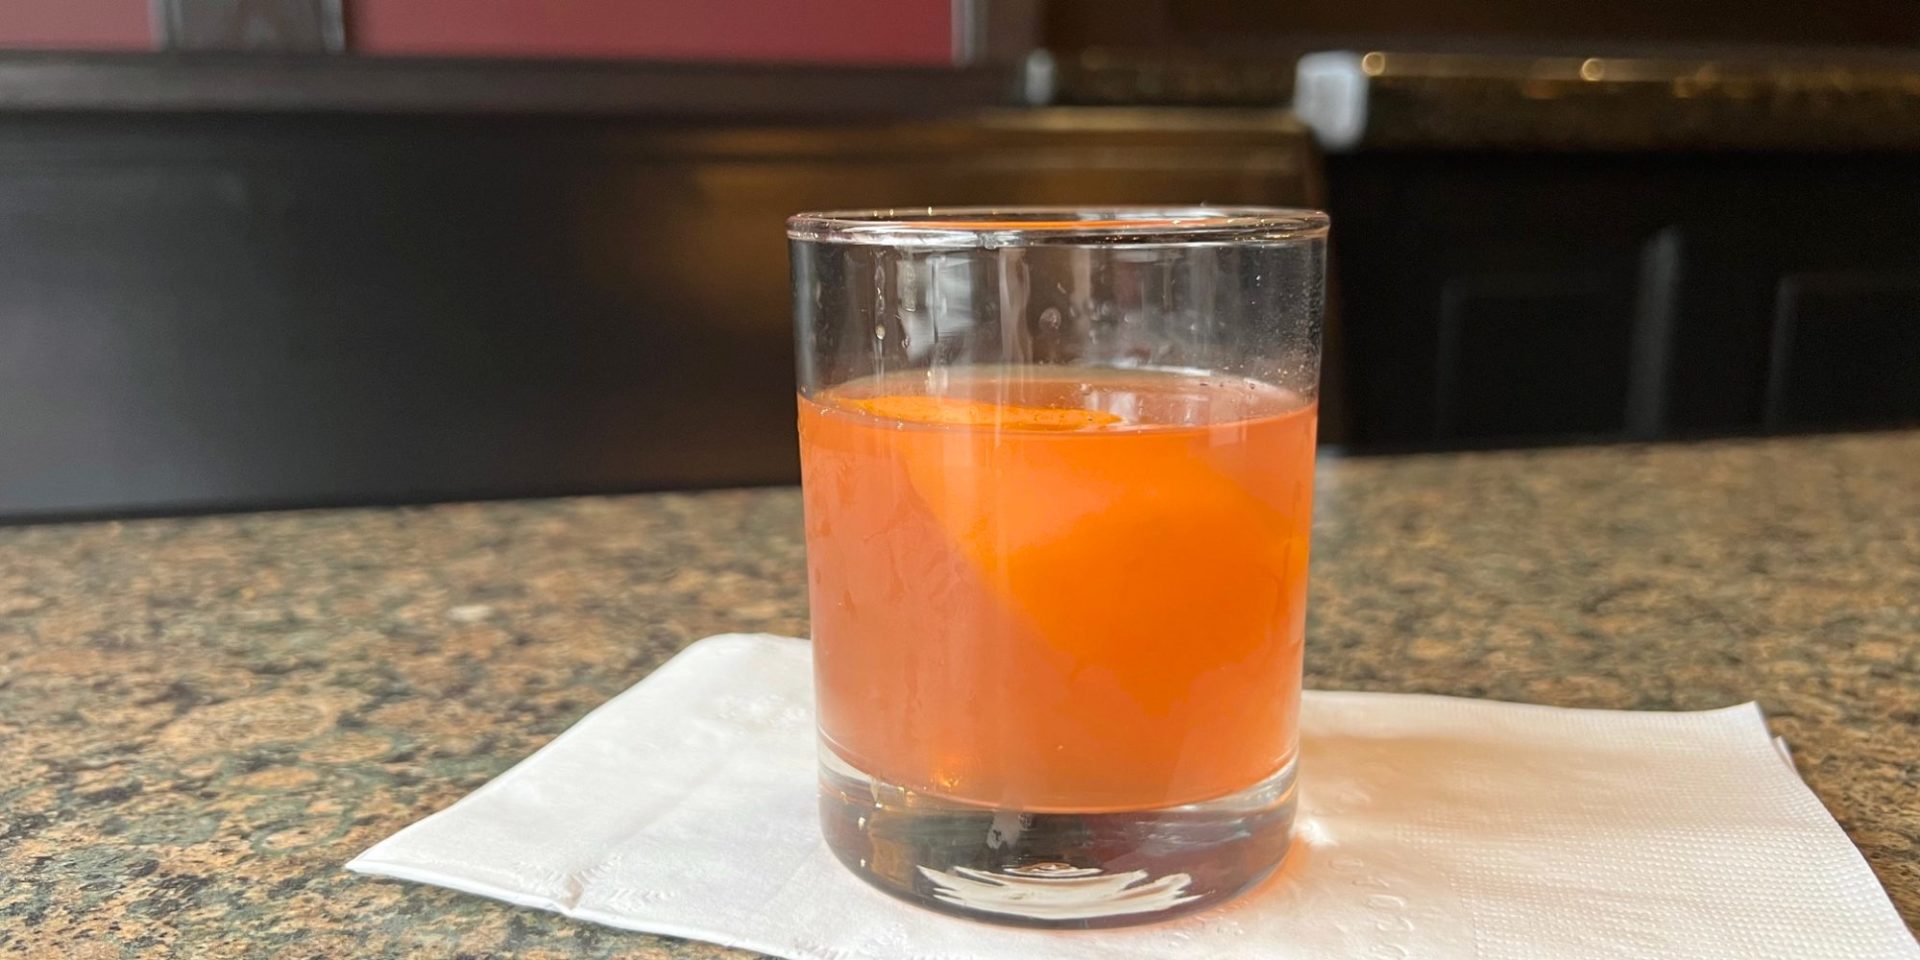 A redish pink cocktail with an orange peel in a half rocks glass on a white napkin on a granite tabletop during the daytime.